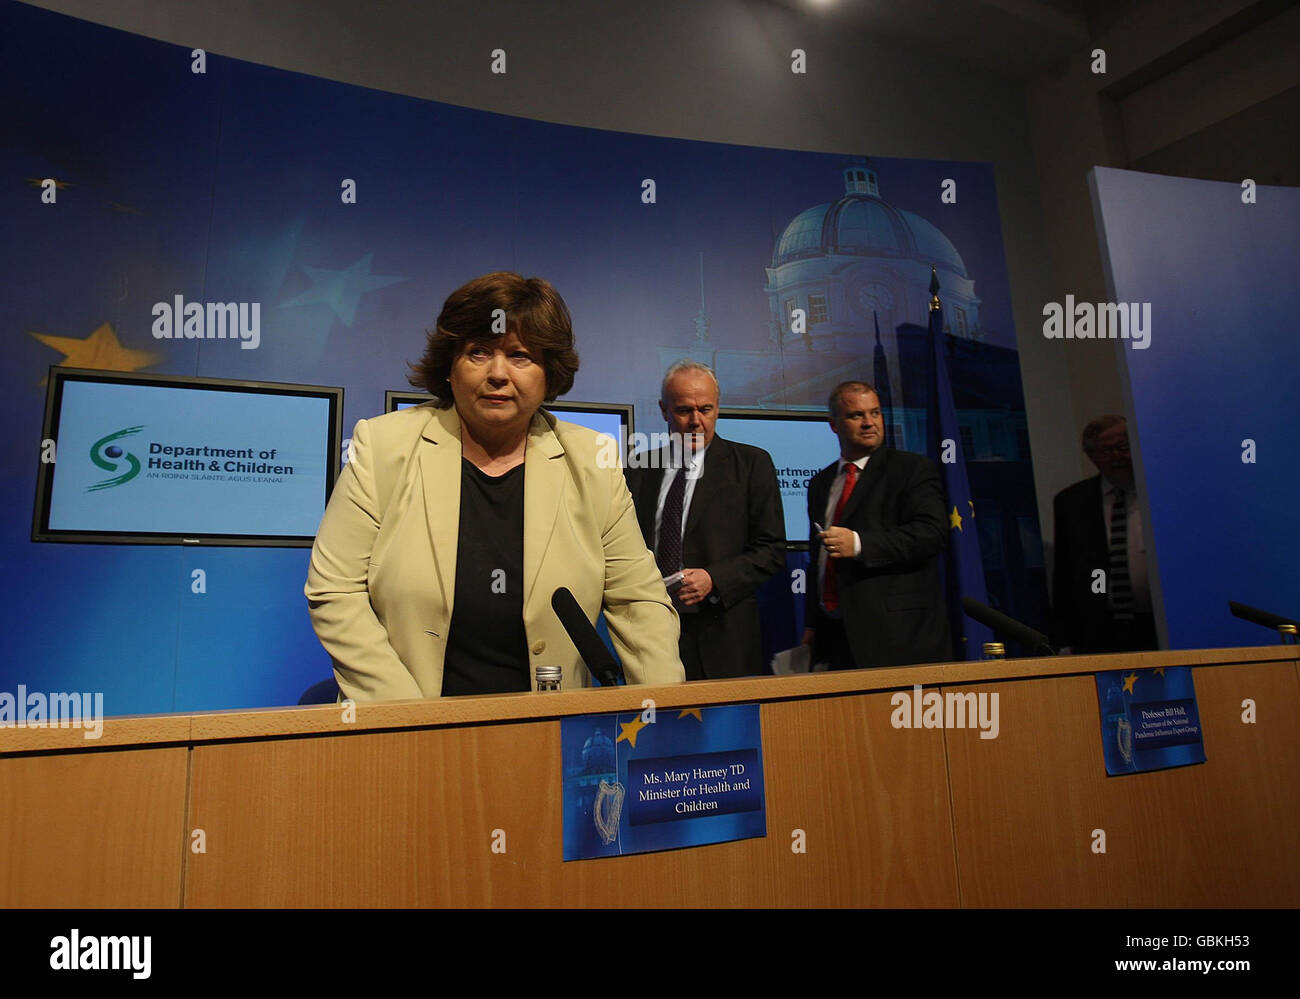 Minister for Health Mary Harney and Dept of Health officials at a press conference in Government Press Centre Dublin after it emerged that four people in the Irish Republic were tonight being tested for swine flu. Stock Photo